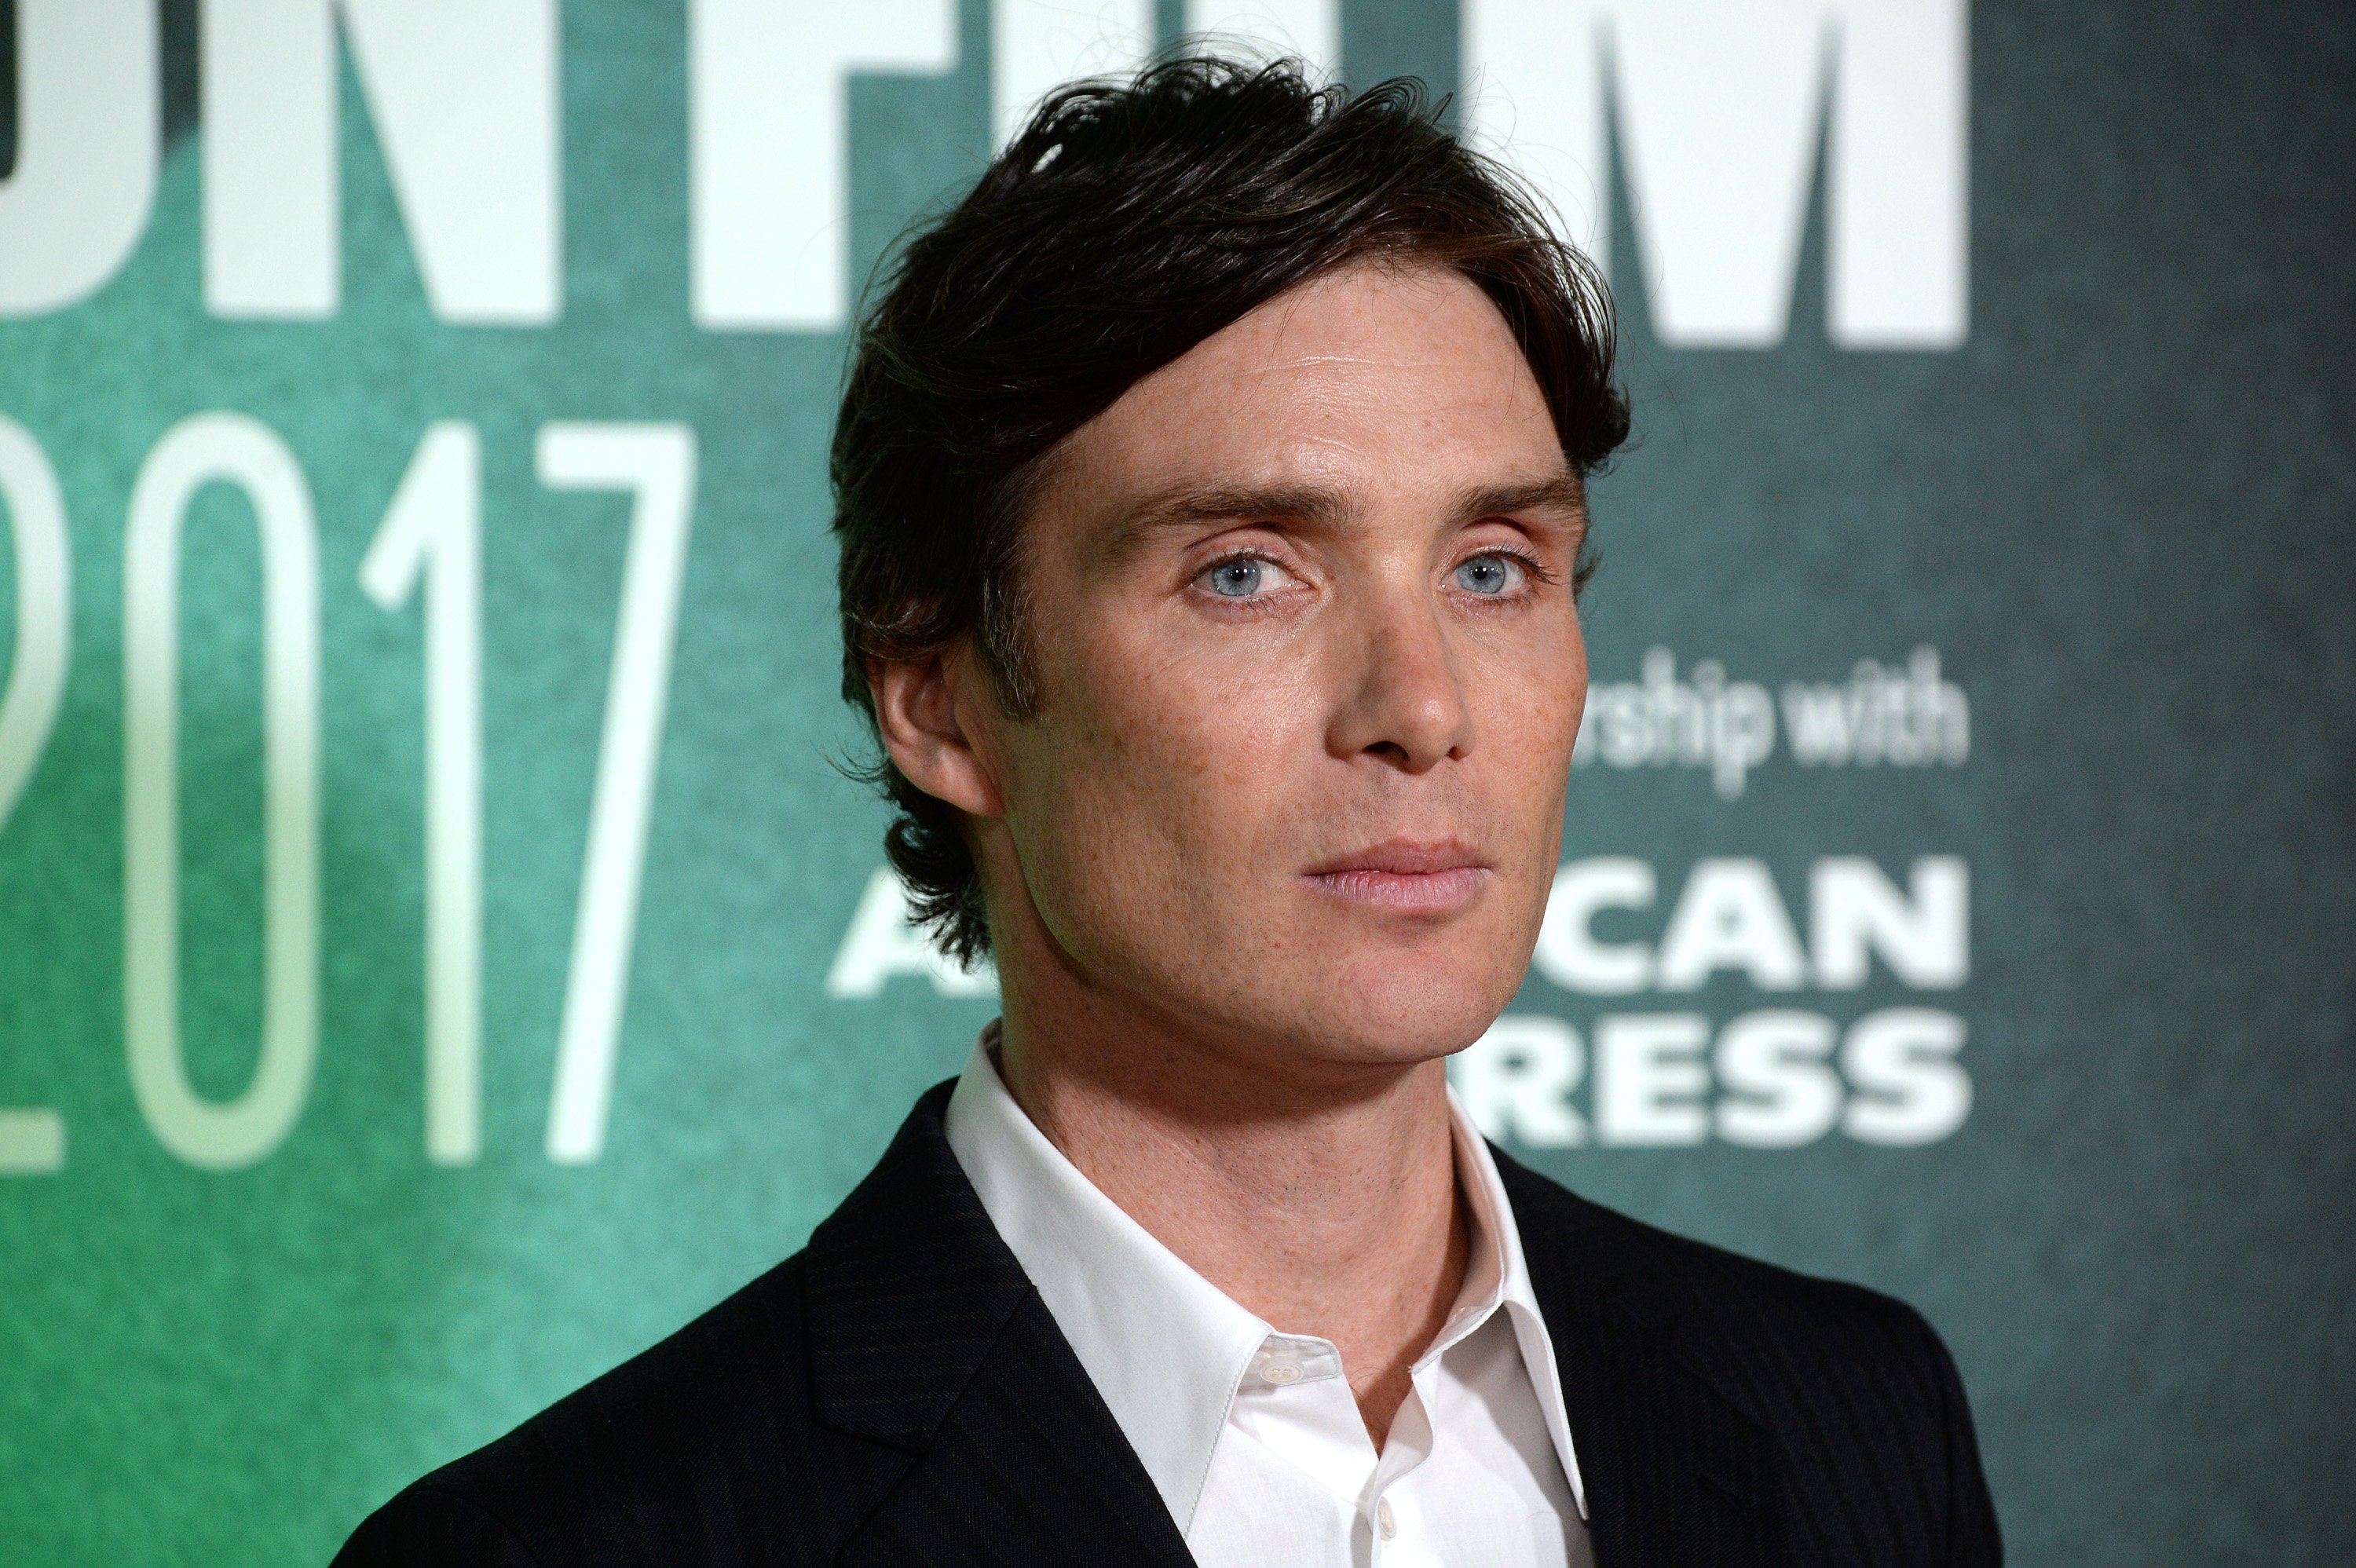 Cillian Murphy at the UK Premiere of "The Party" on October 10, 2017 in London. | Source: Getty Images